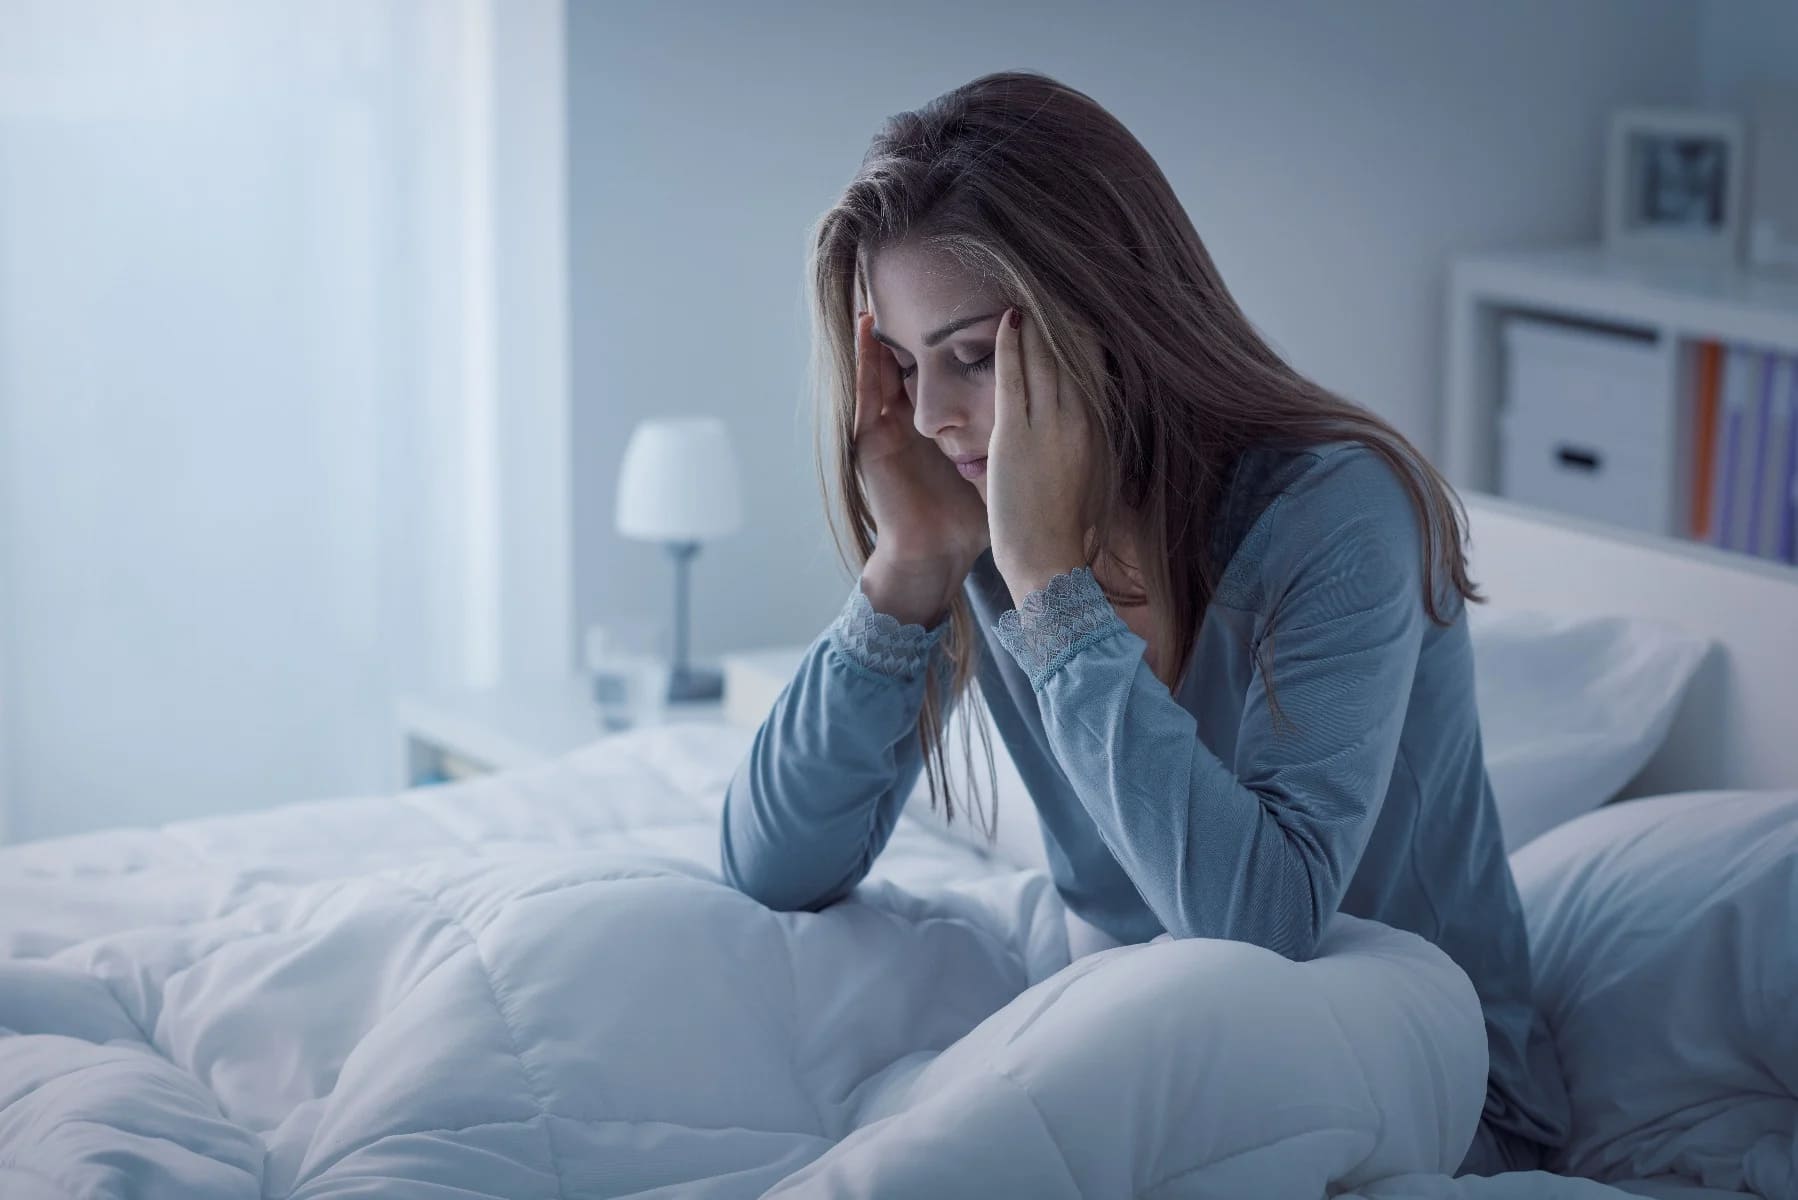 Difficulty sleeping is a common symptom of premature menopause